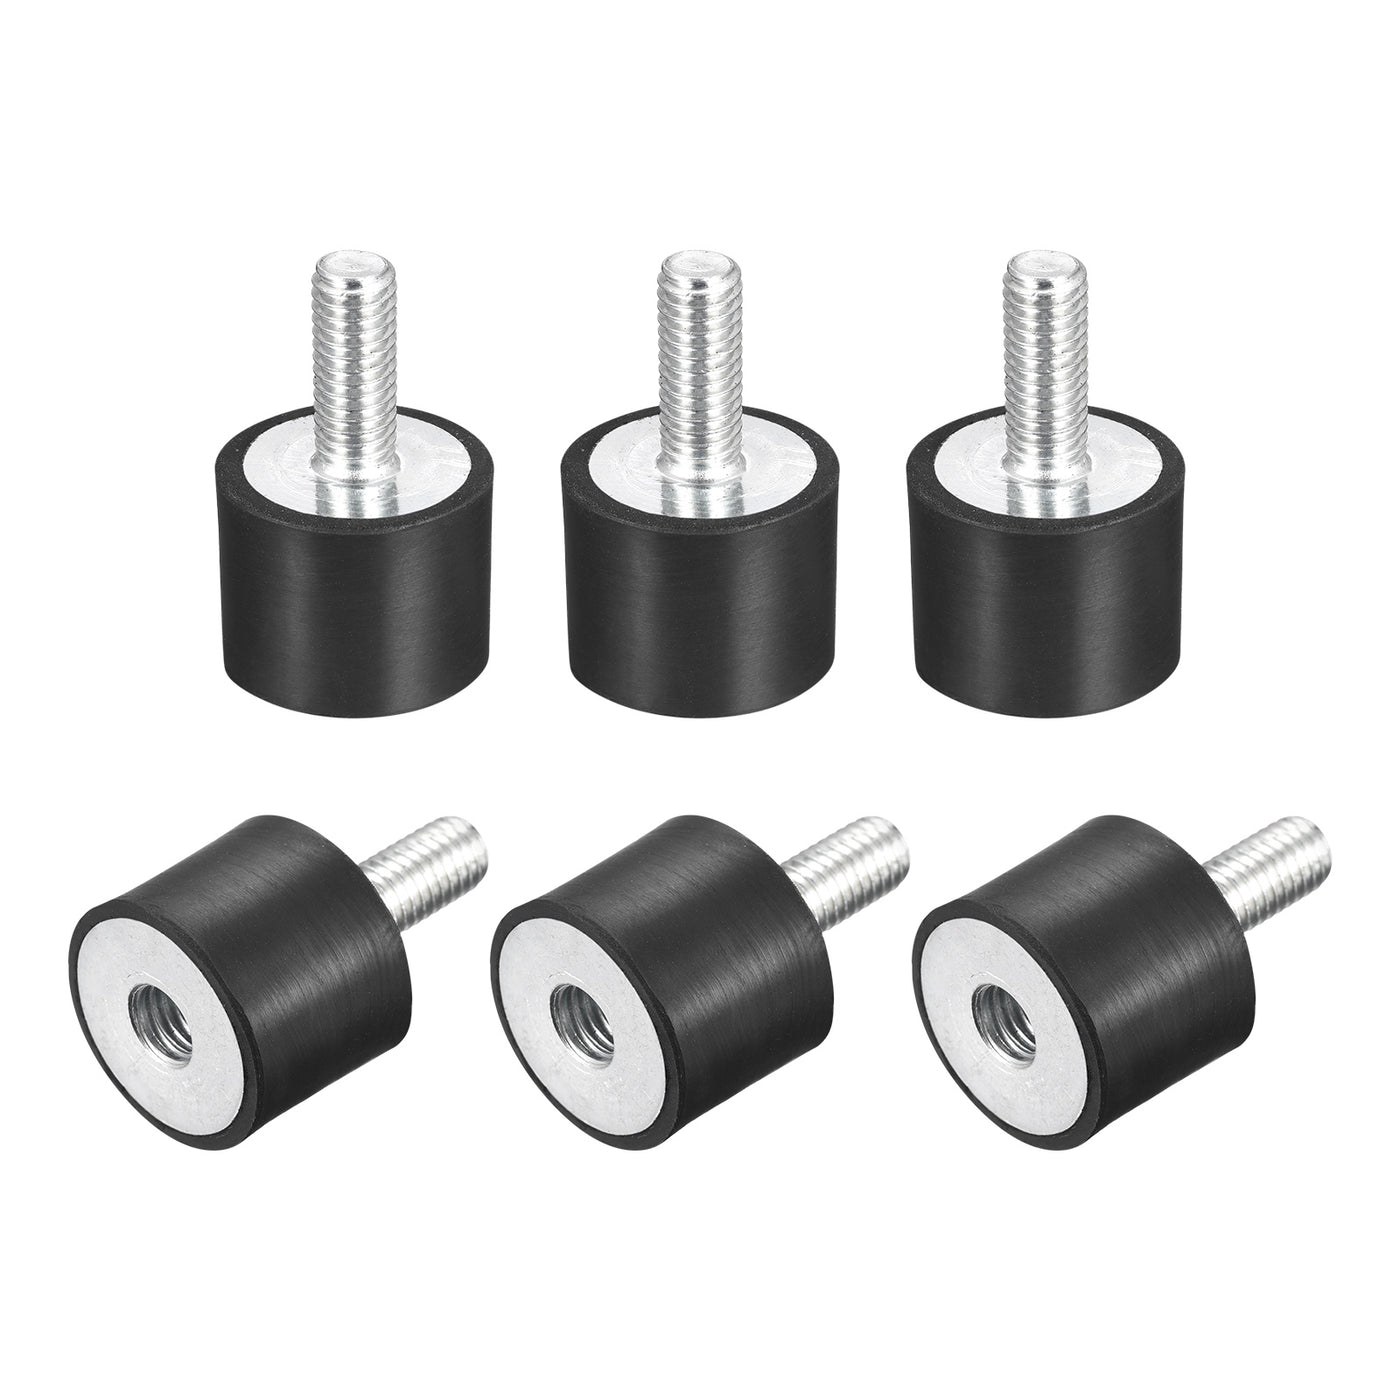 uxcell Uxcell Rubber Mount 6pcs M8 Male/Female Vibration Isolator Shock Absorber, D25mmxH20mm